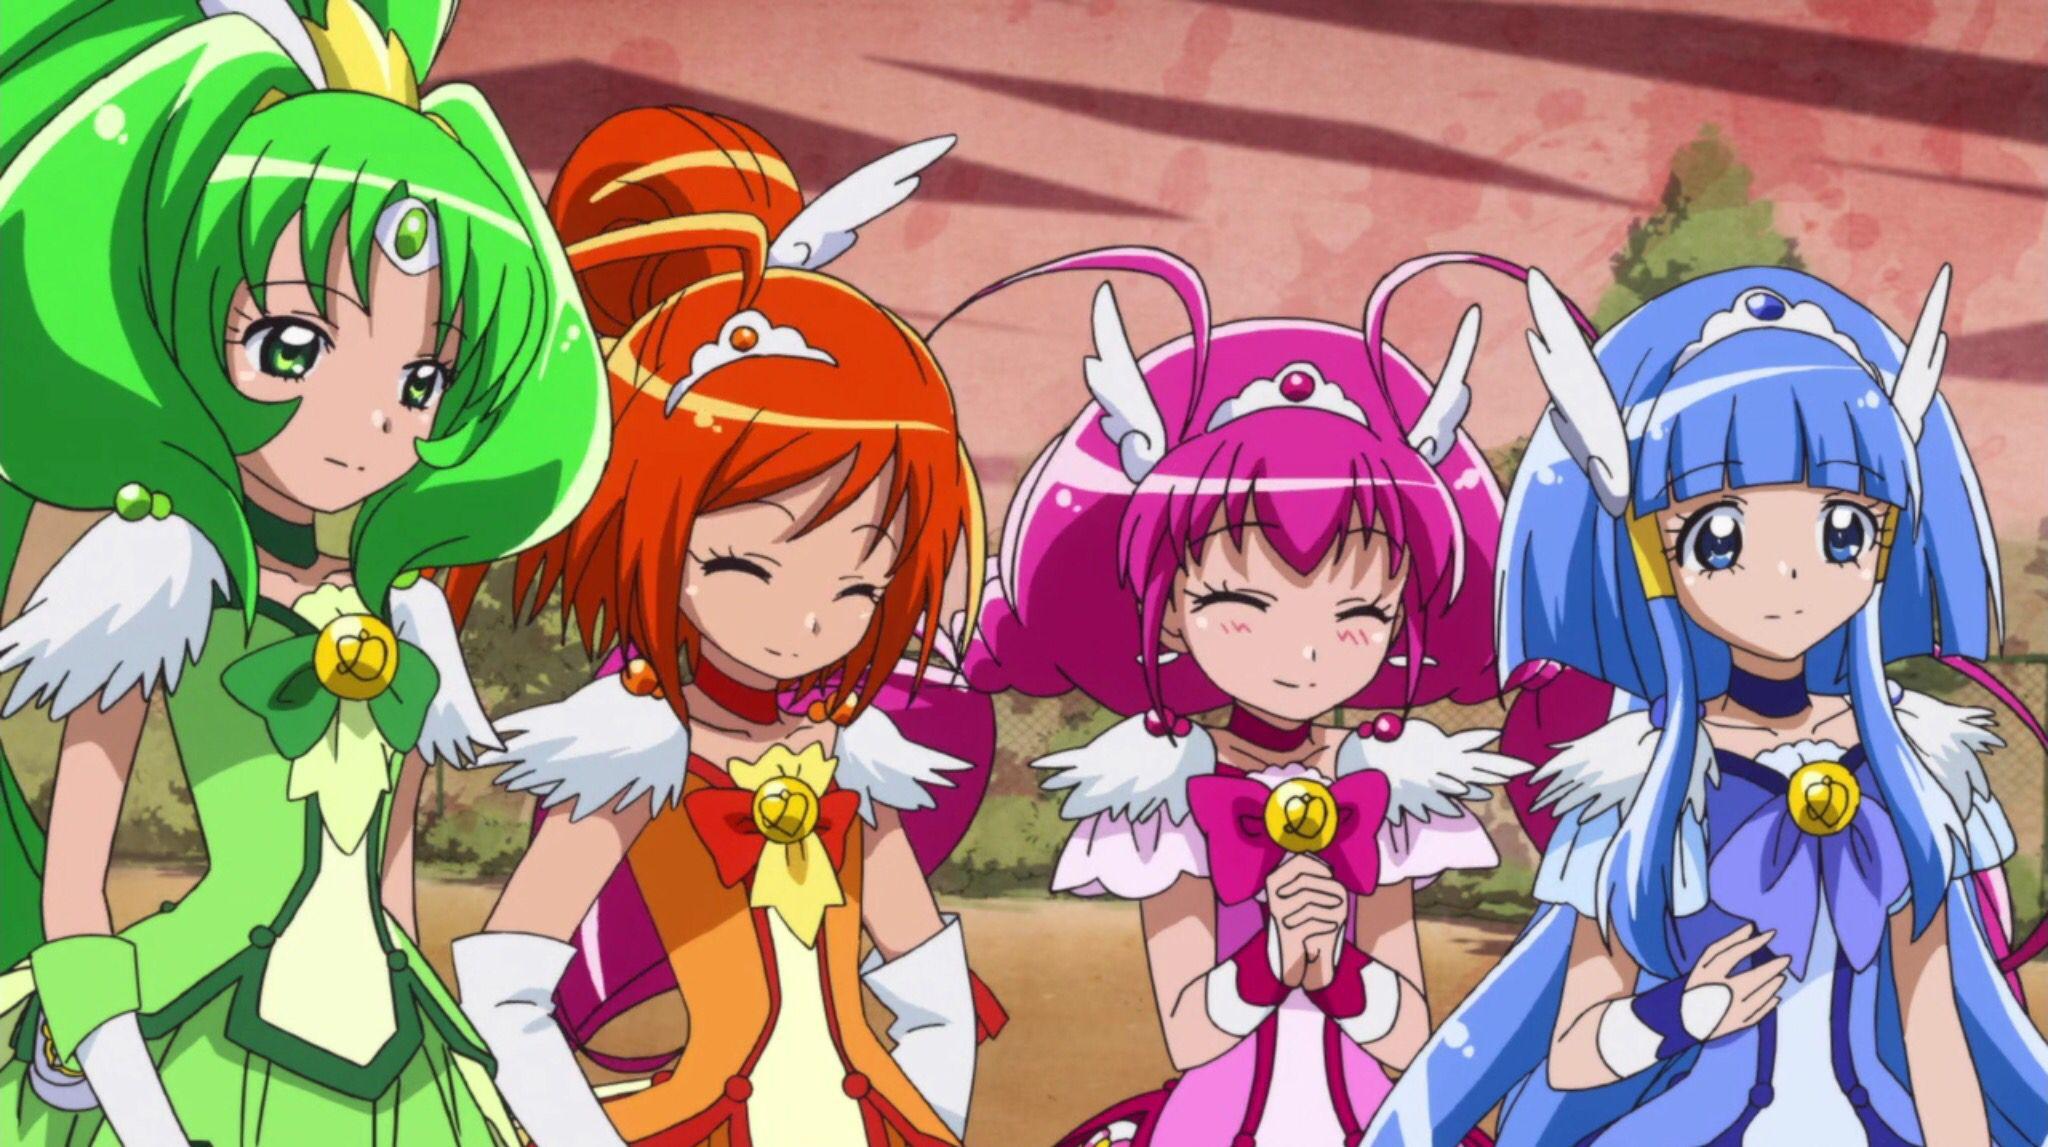 of the Glitter Force. Glitter Force (Smile Precure)